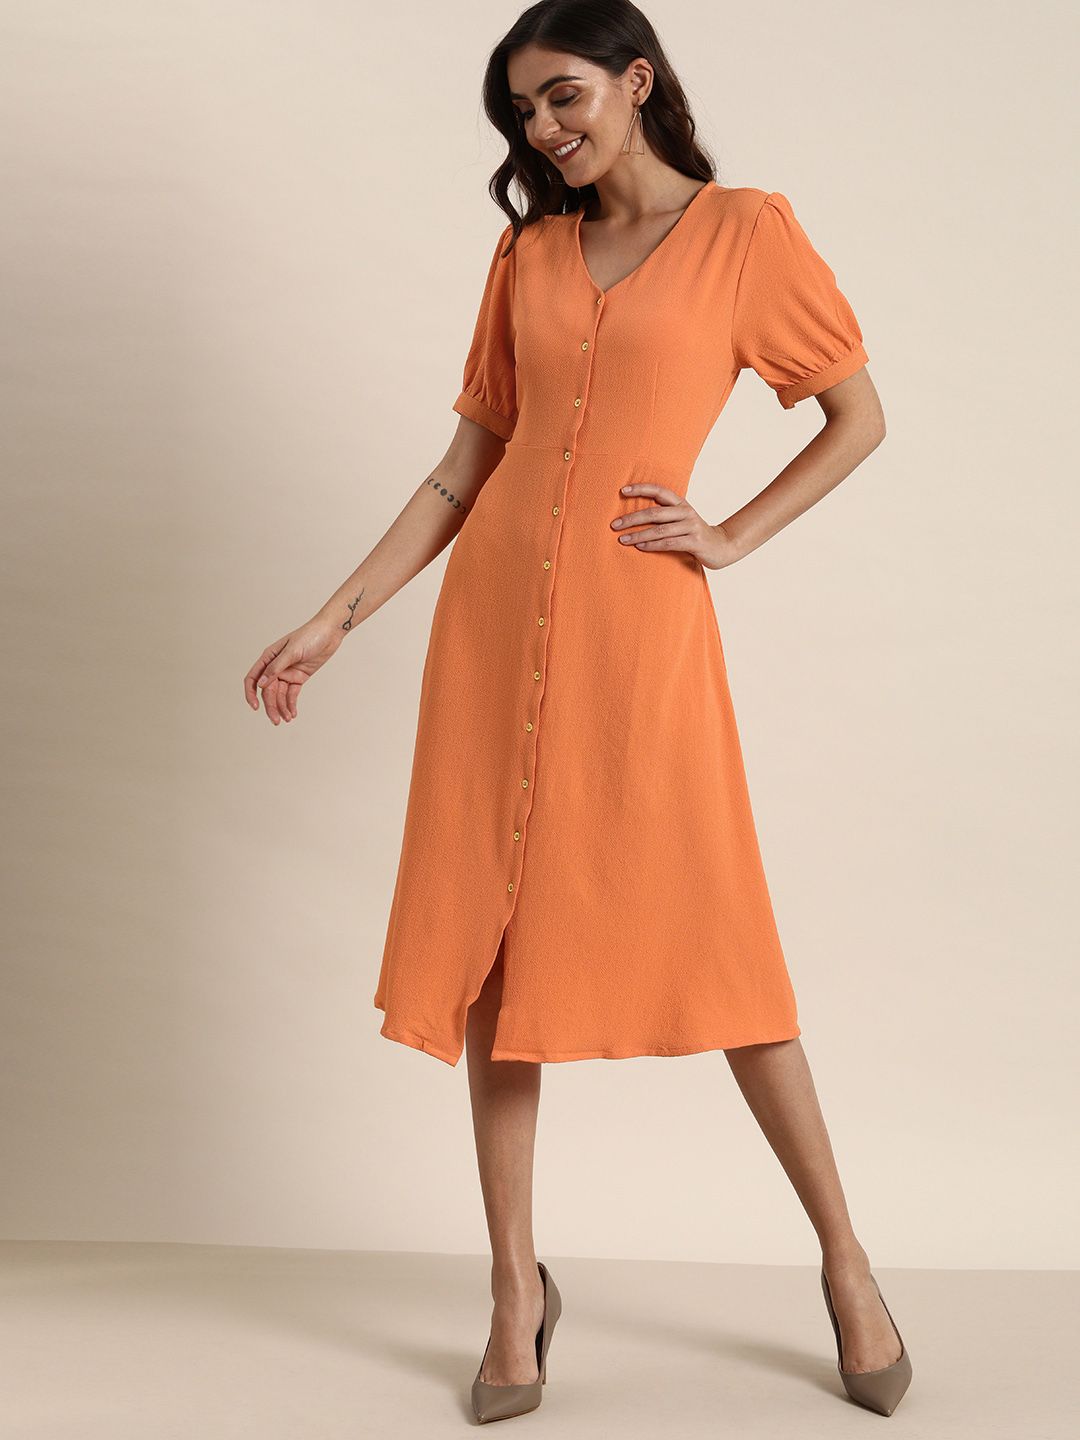 all about you Women Coral Solid Fit & Flare Dress Price in India